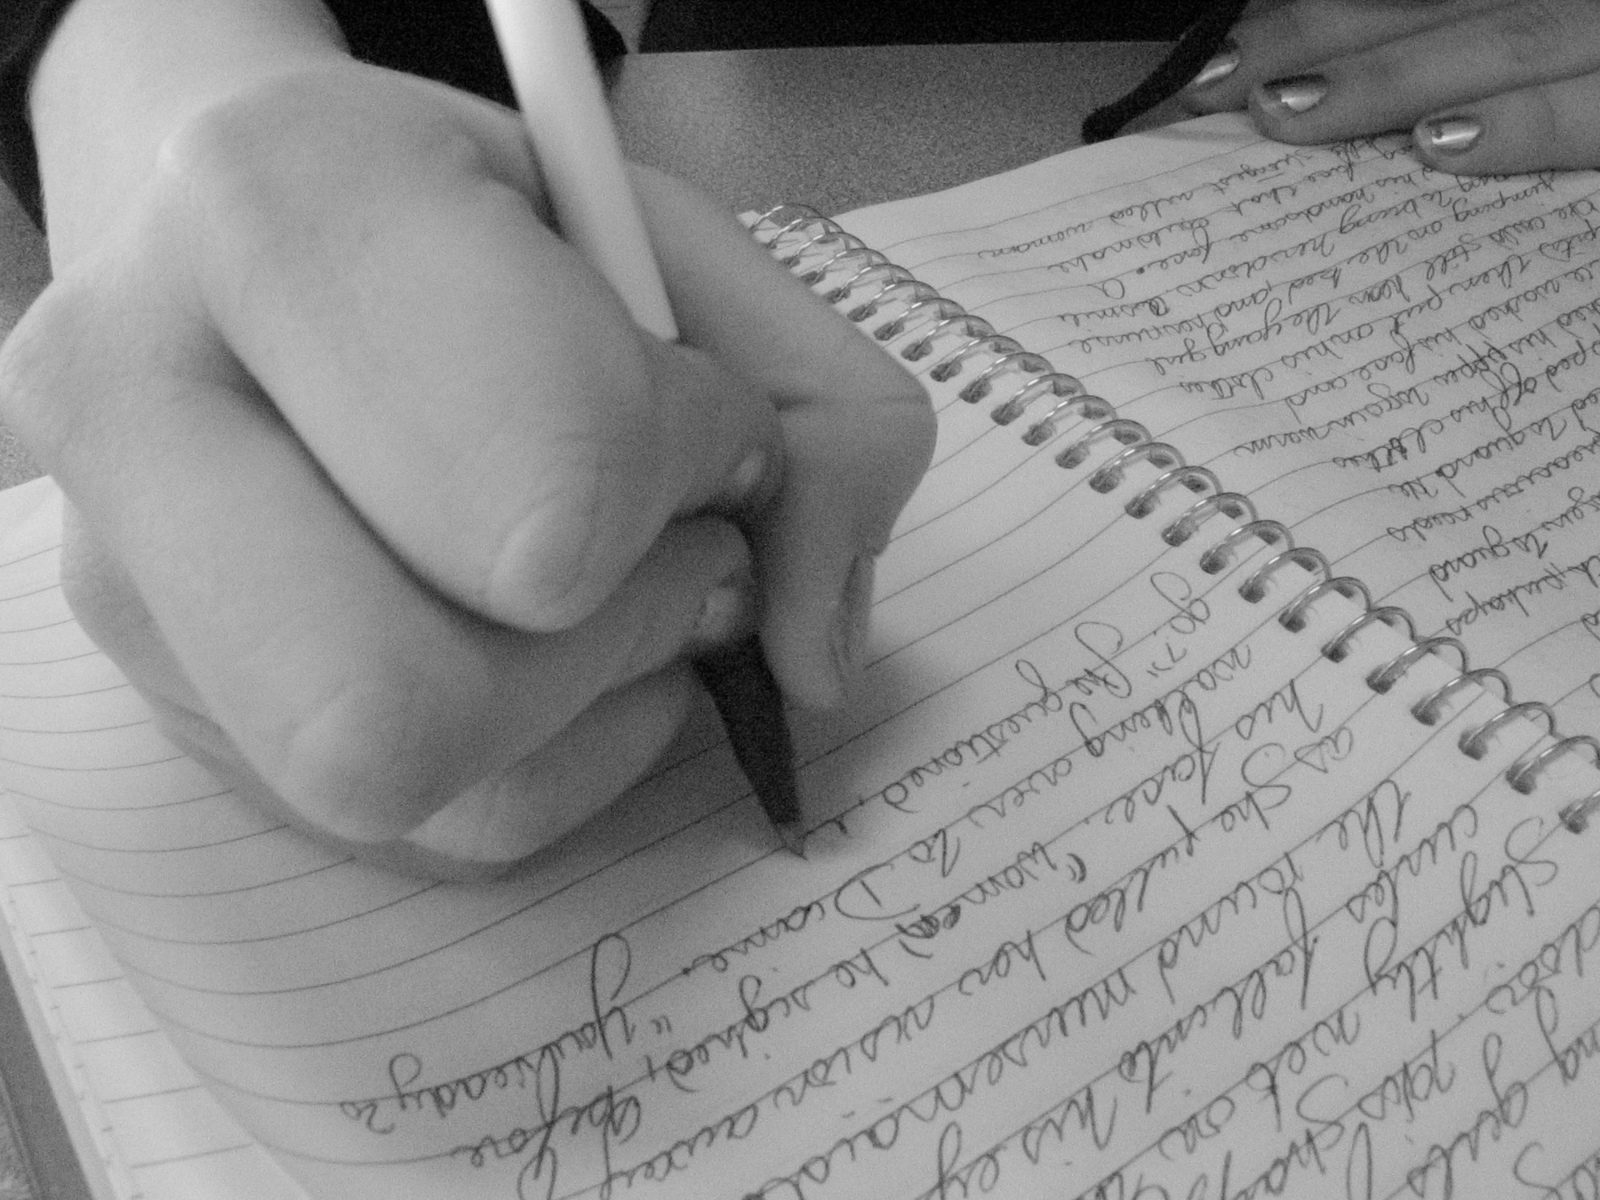 girl writing in notebook